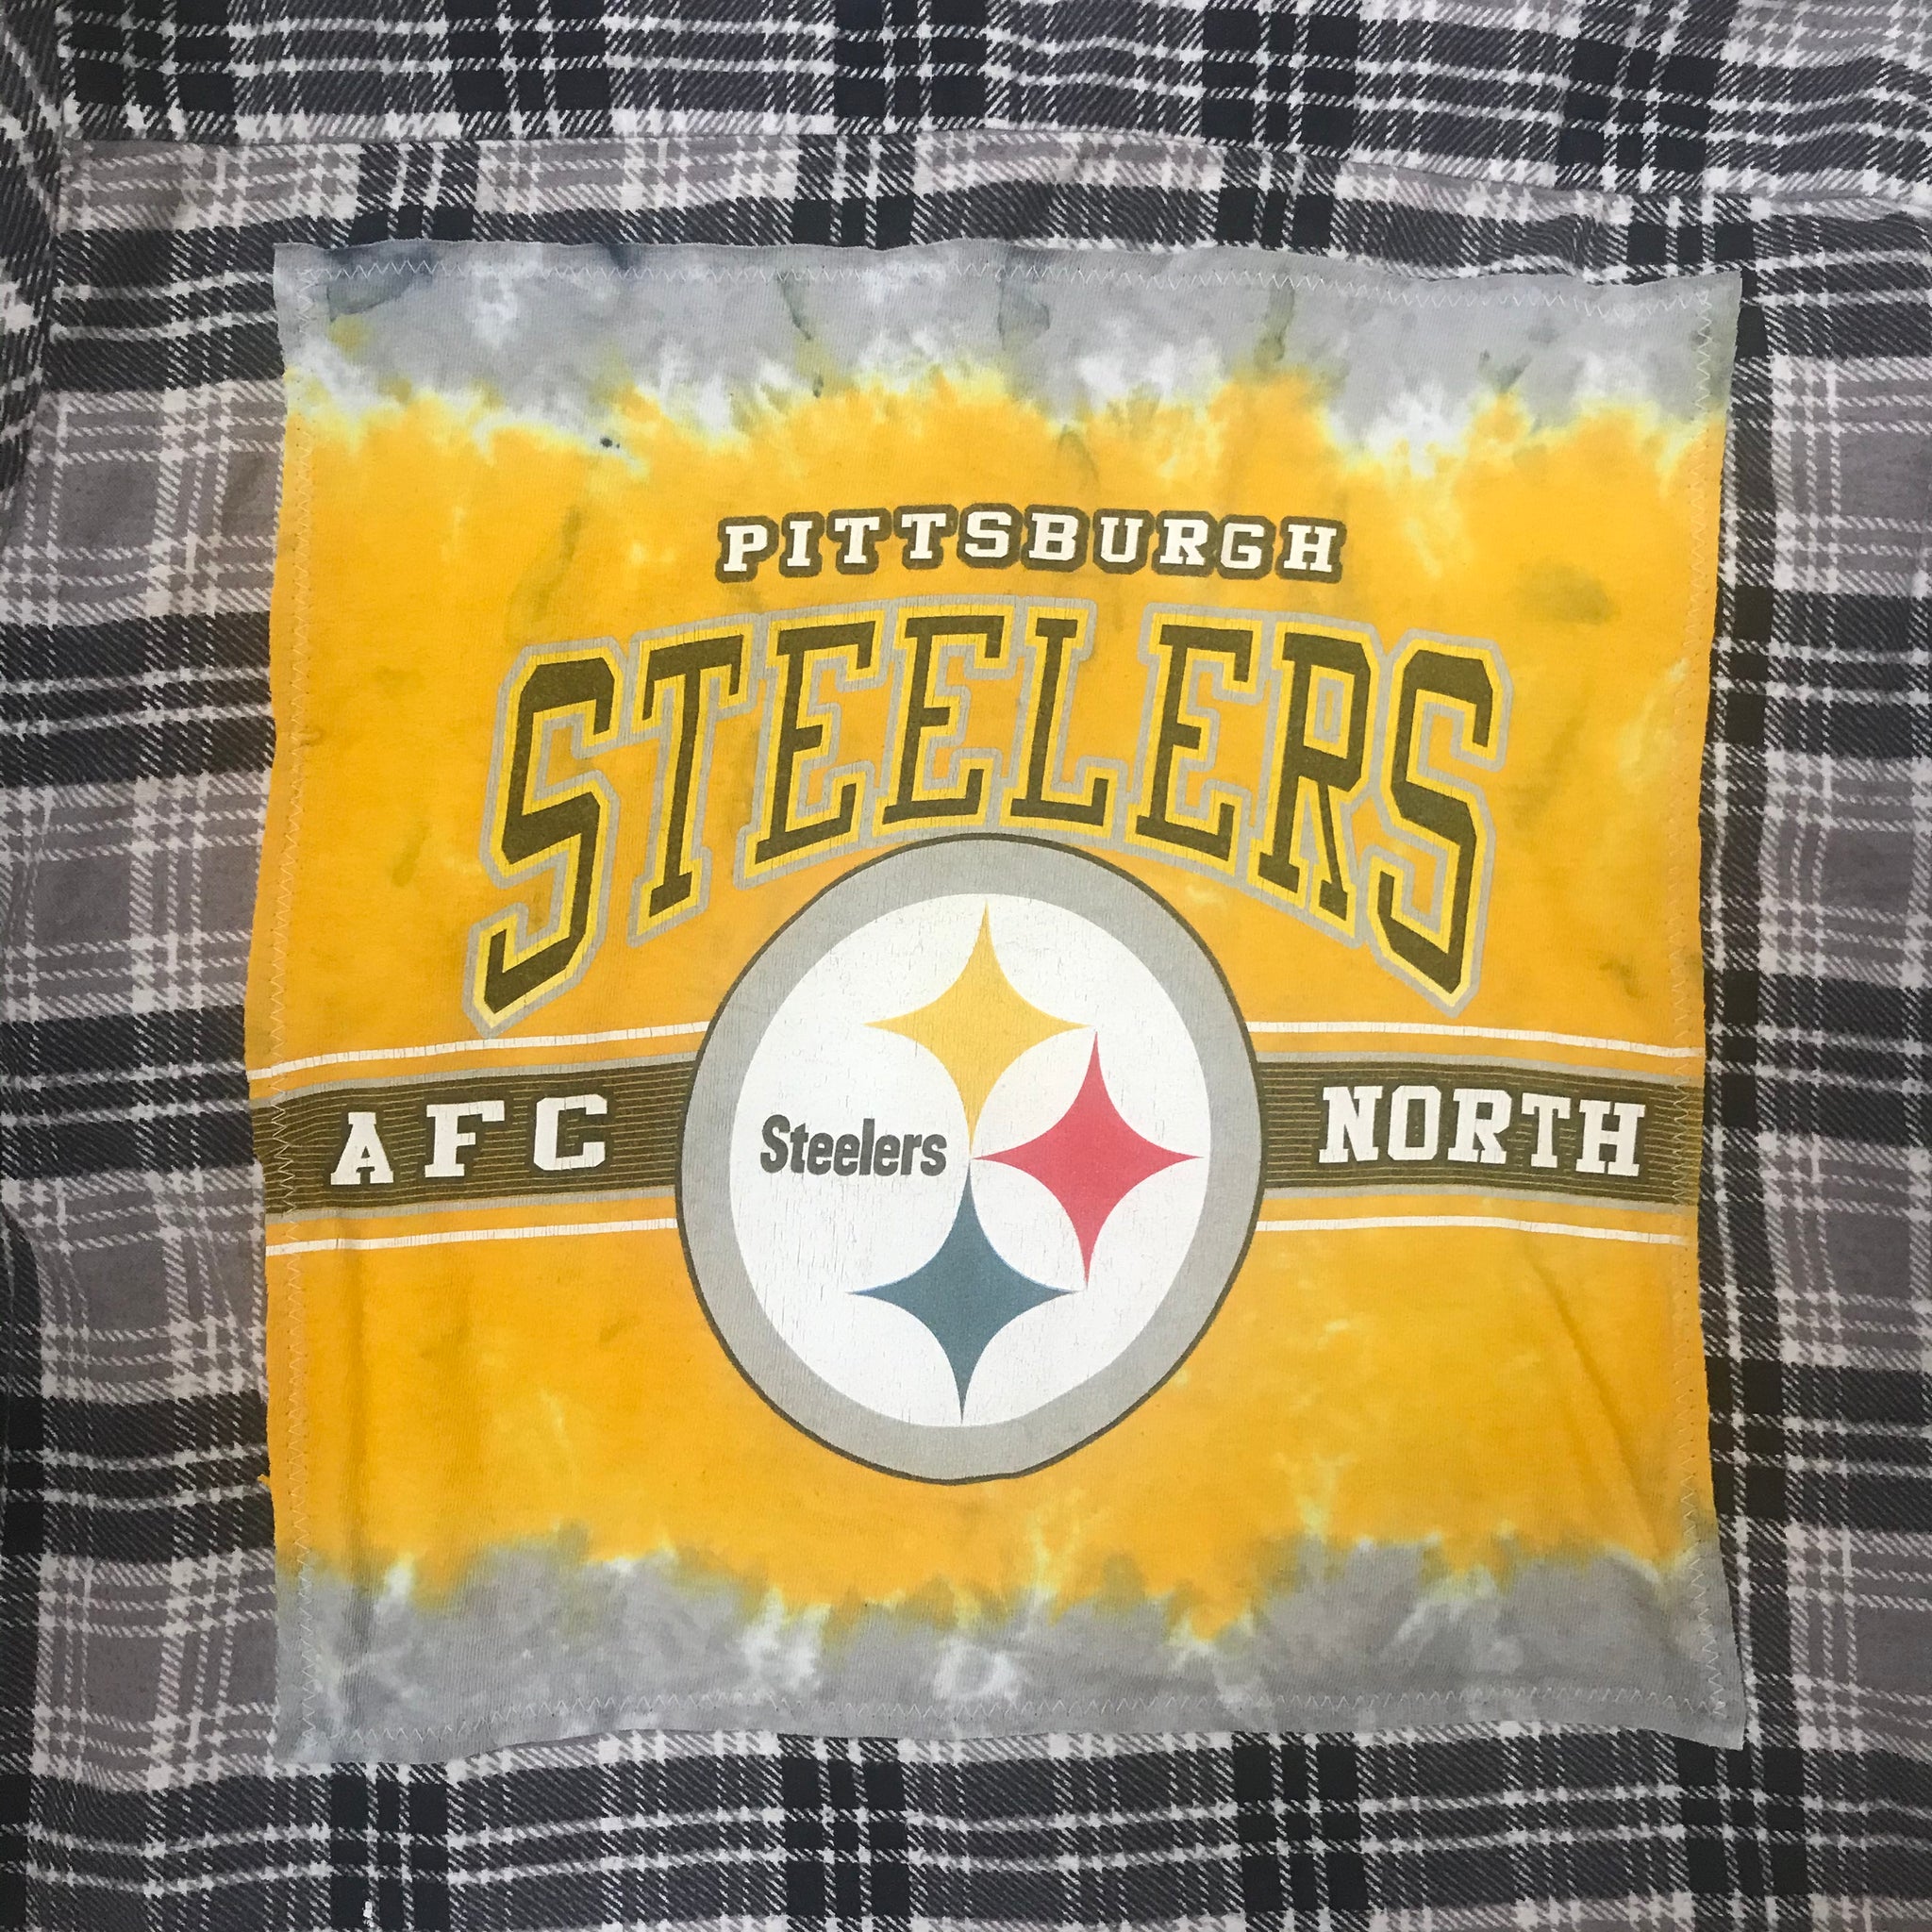 Pittsburgh Steelers LARGE T-shirt backed flannels